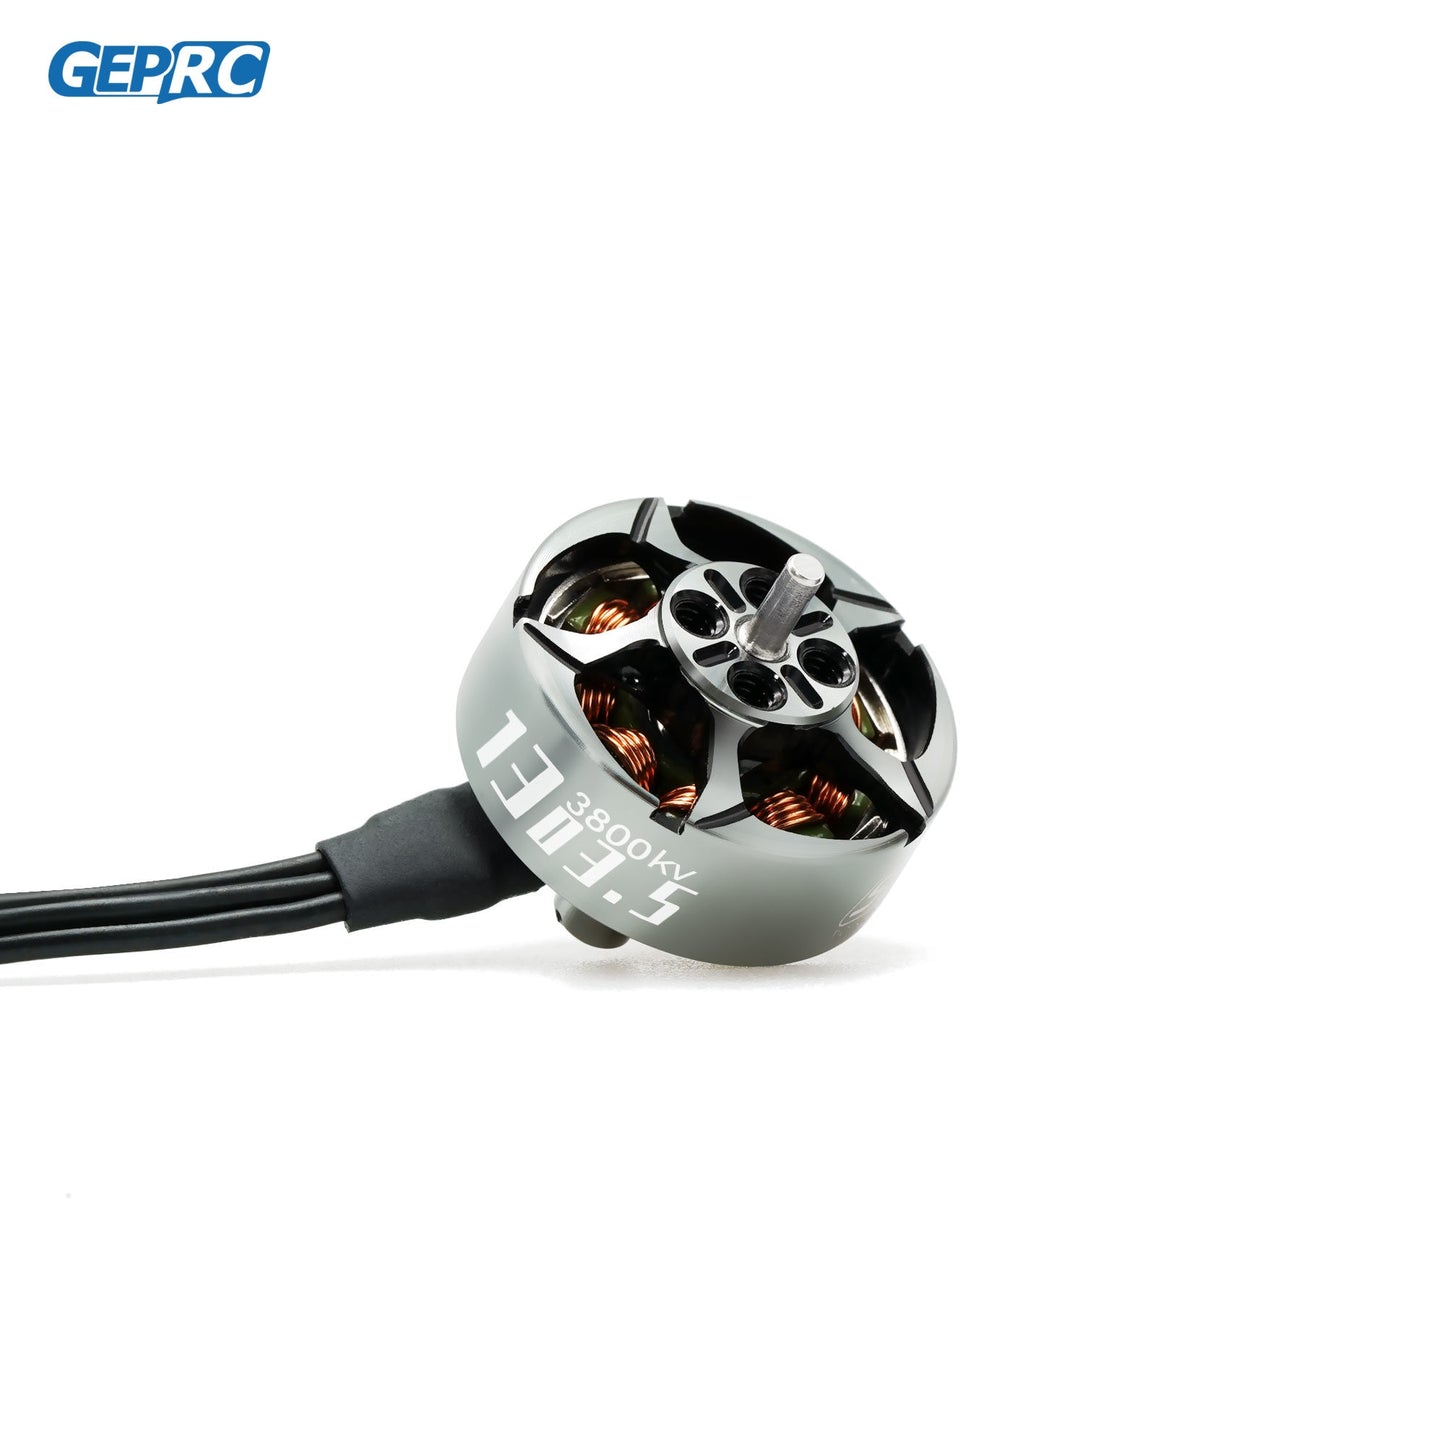 GEPRC SPEEDX2 1303.5 3800KV/5500KV Motor - Suitable for 2″ Cinewhoop FPV Drones Cinelog20 for RC FPV Quadcopter Freestyle Drone